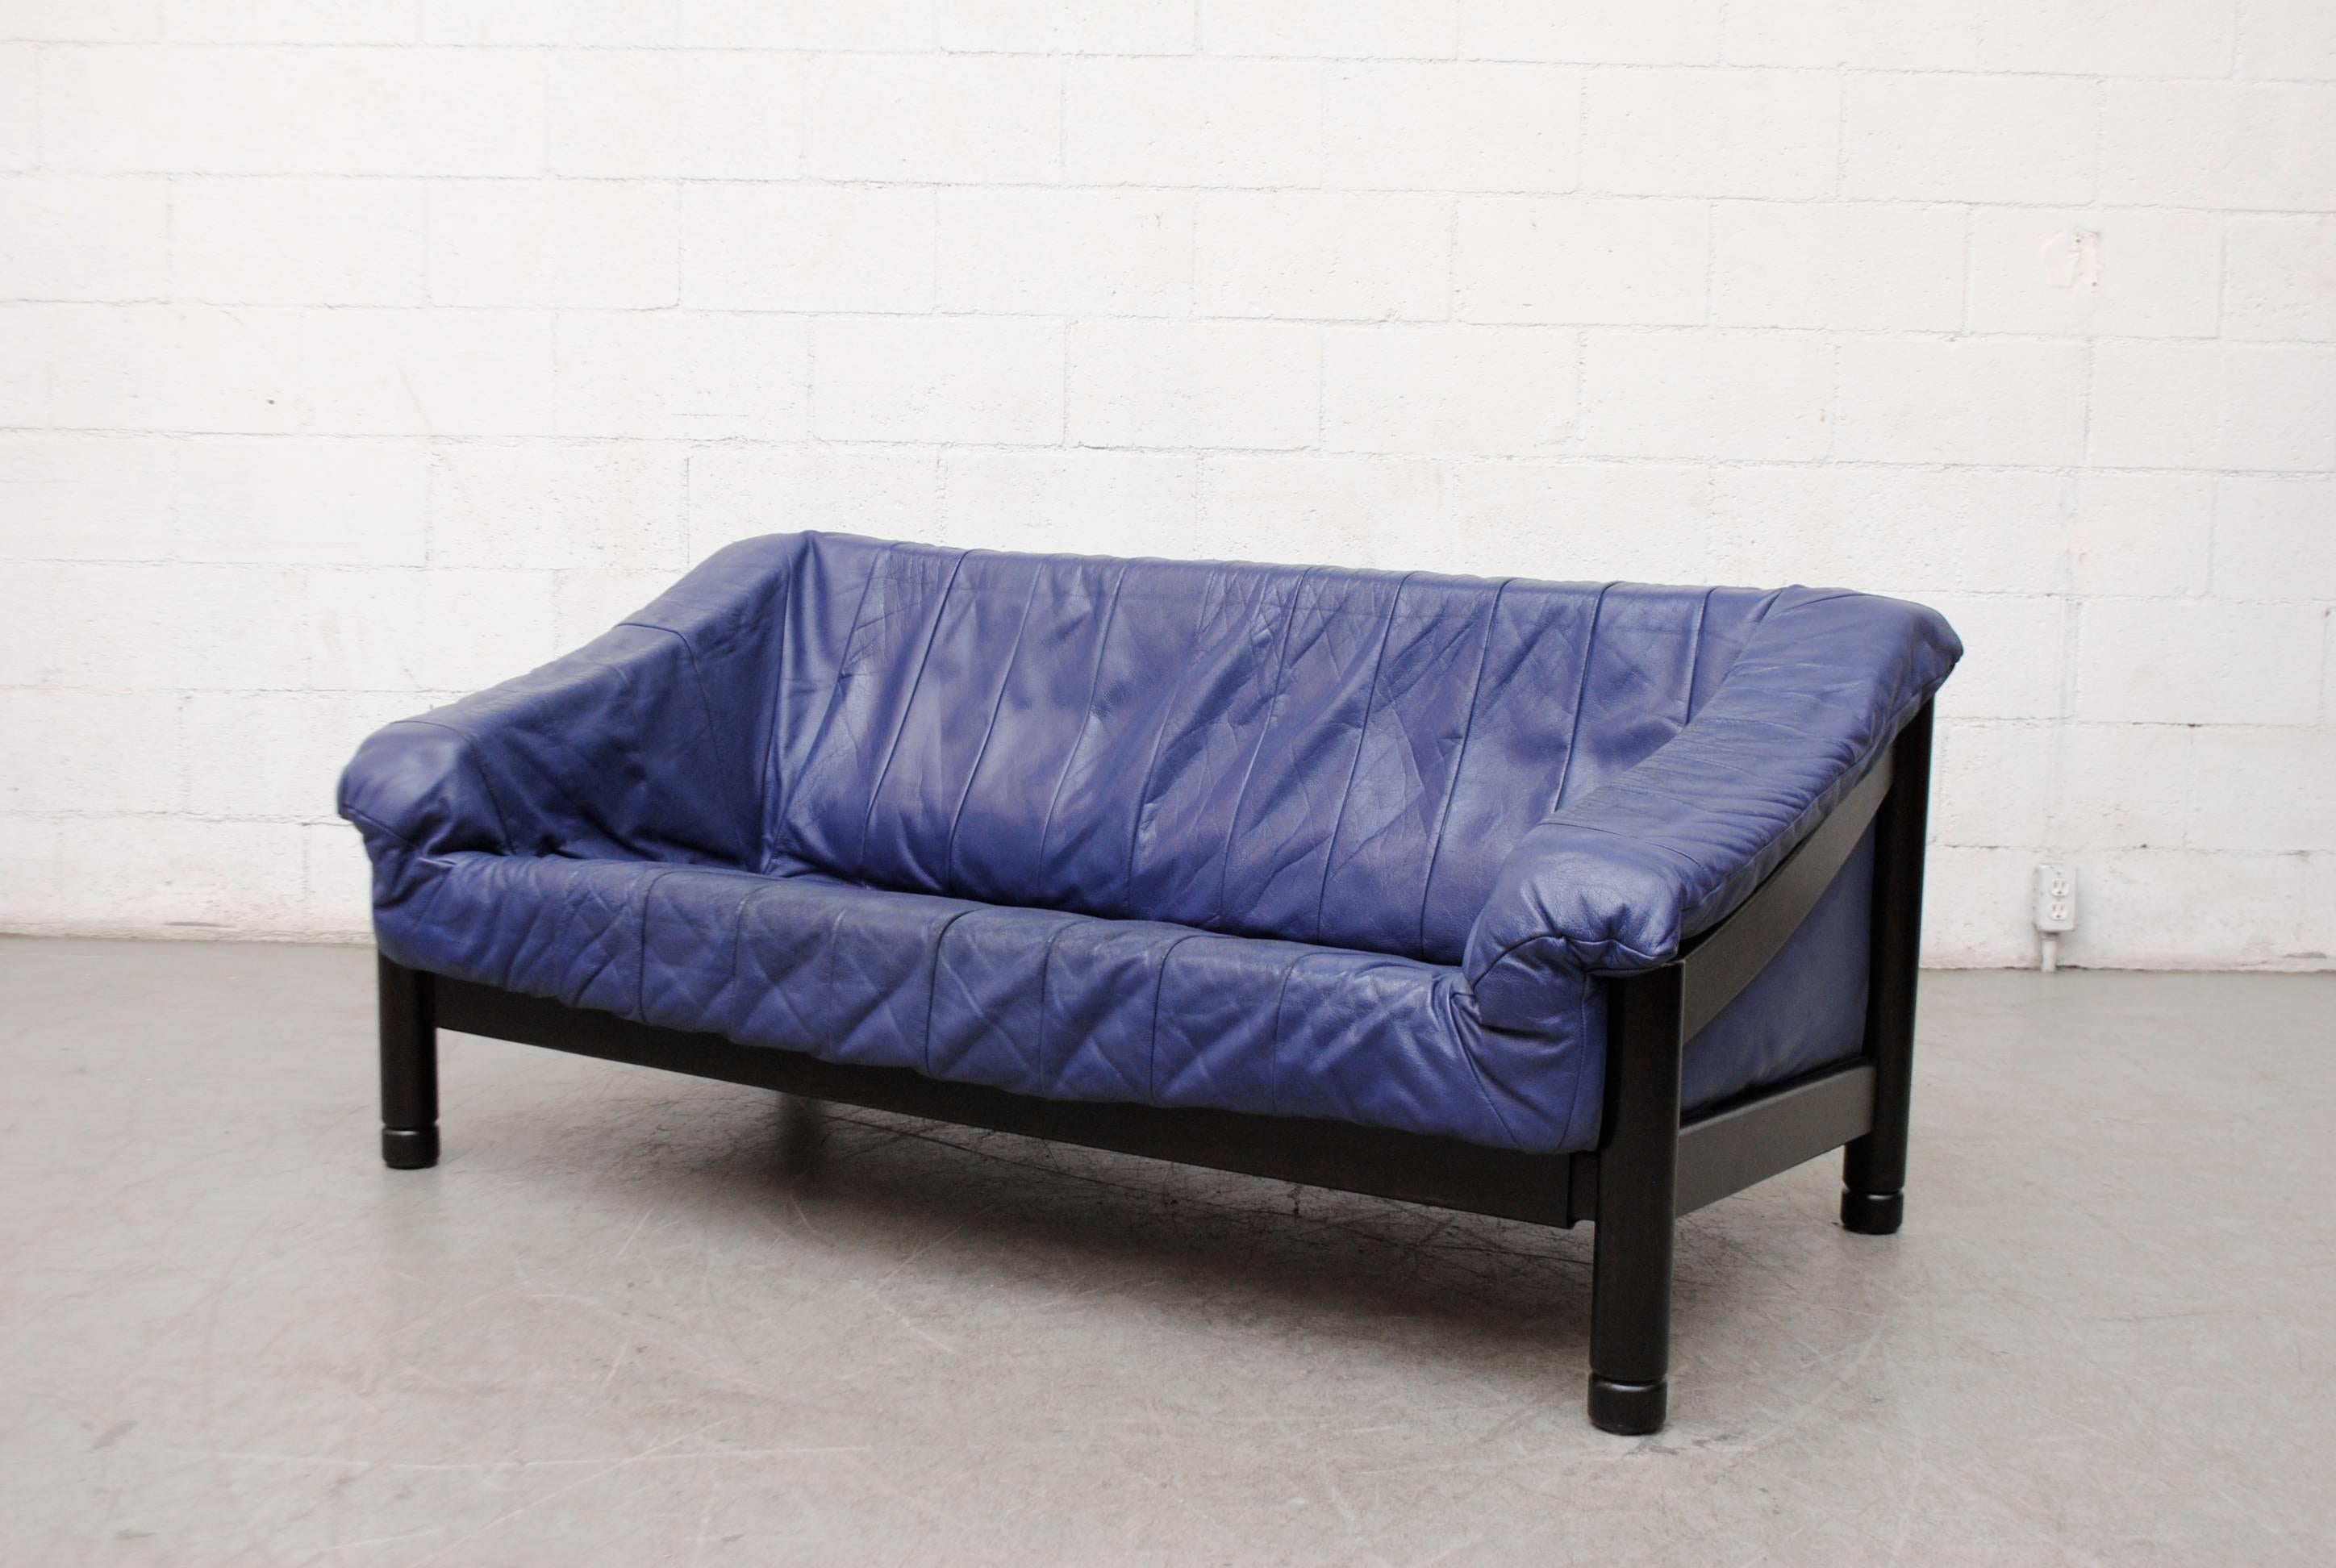 Handsome loveseat with lightly refinished, ebony stained wood frame and cobalt blue leather bucket insert cushion. Good original condition with signs of wear consistent with its age and usage.